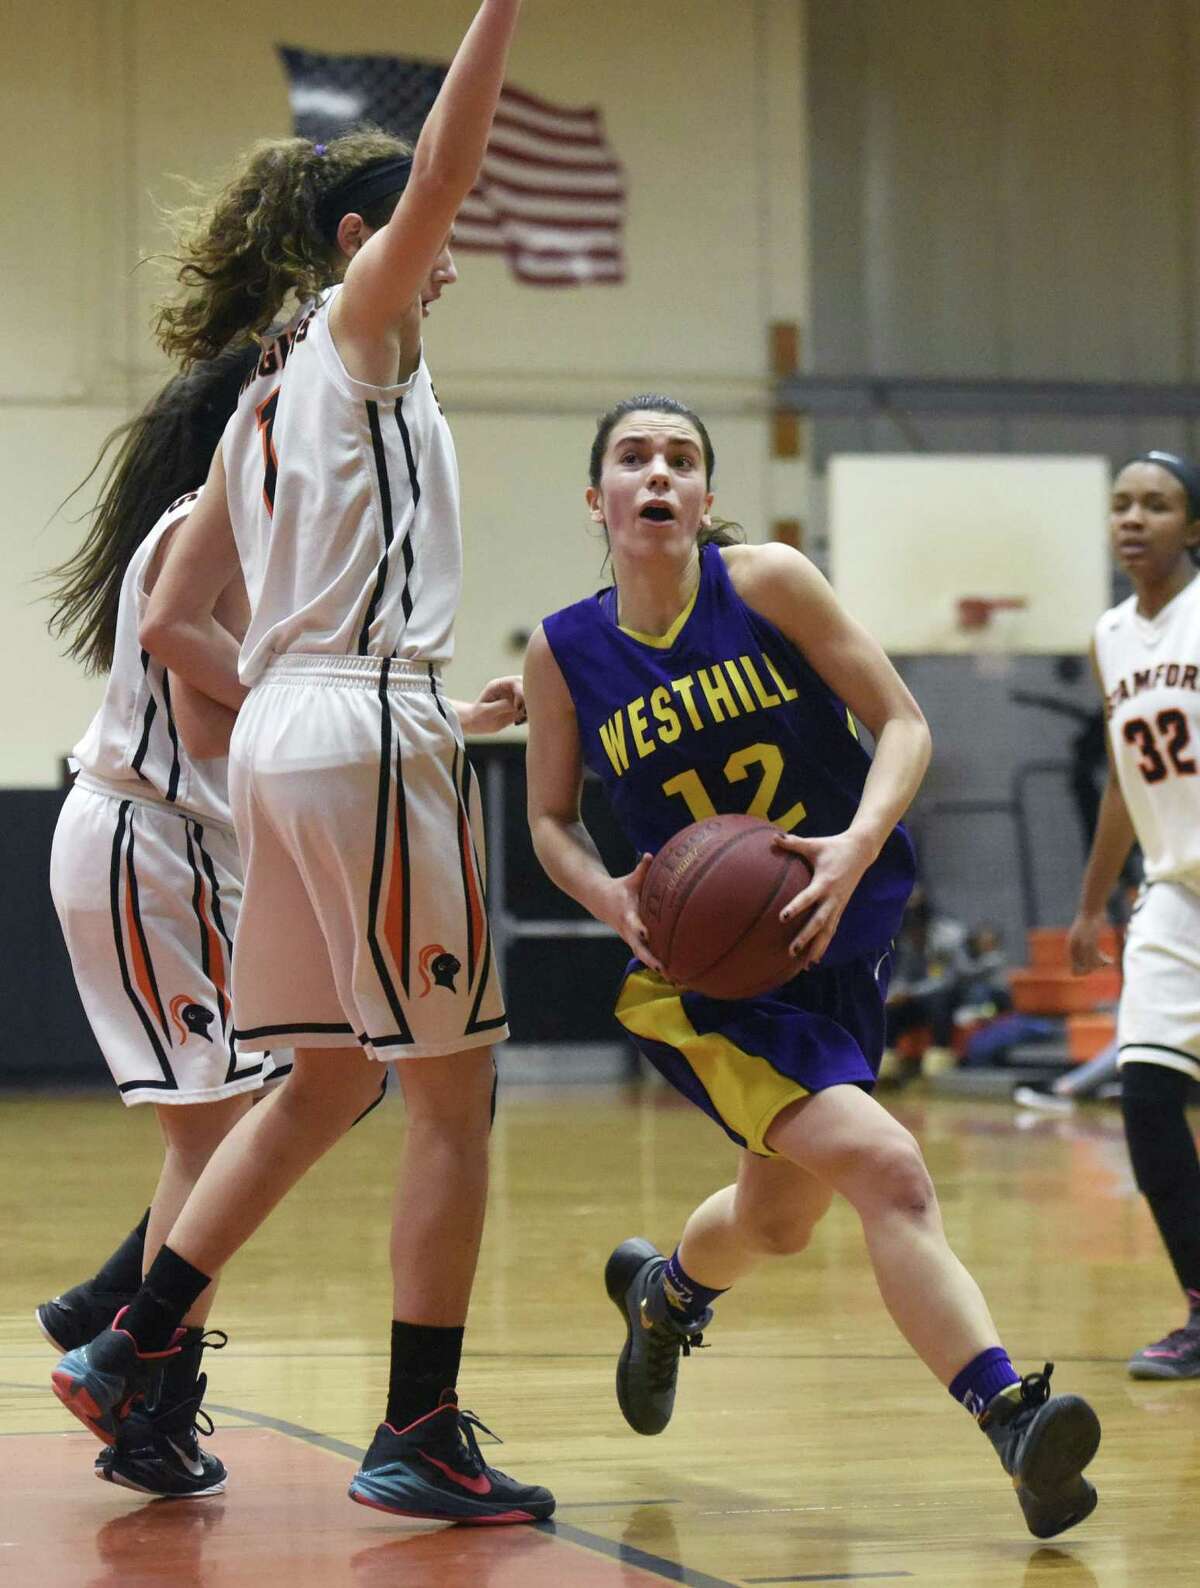 Westhill senior Olivia Wise (12) is a co-captain along with fellow senior Gabby Laccona on the Vikings’ squad. Westhill graduated just two seniors and is looking to turn around a 6-12 record.